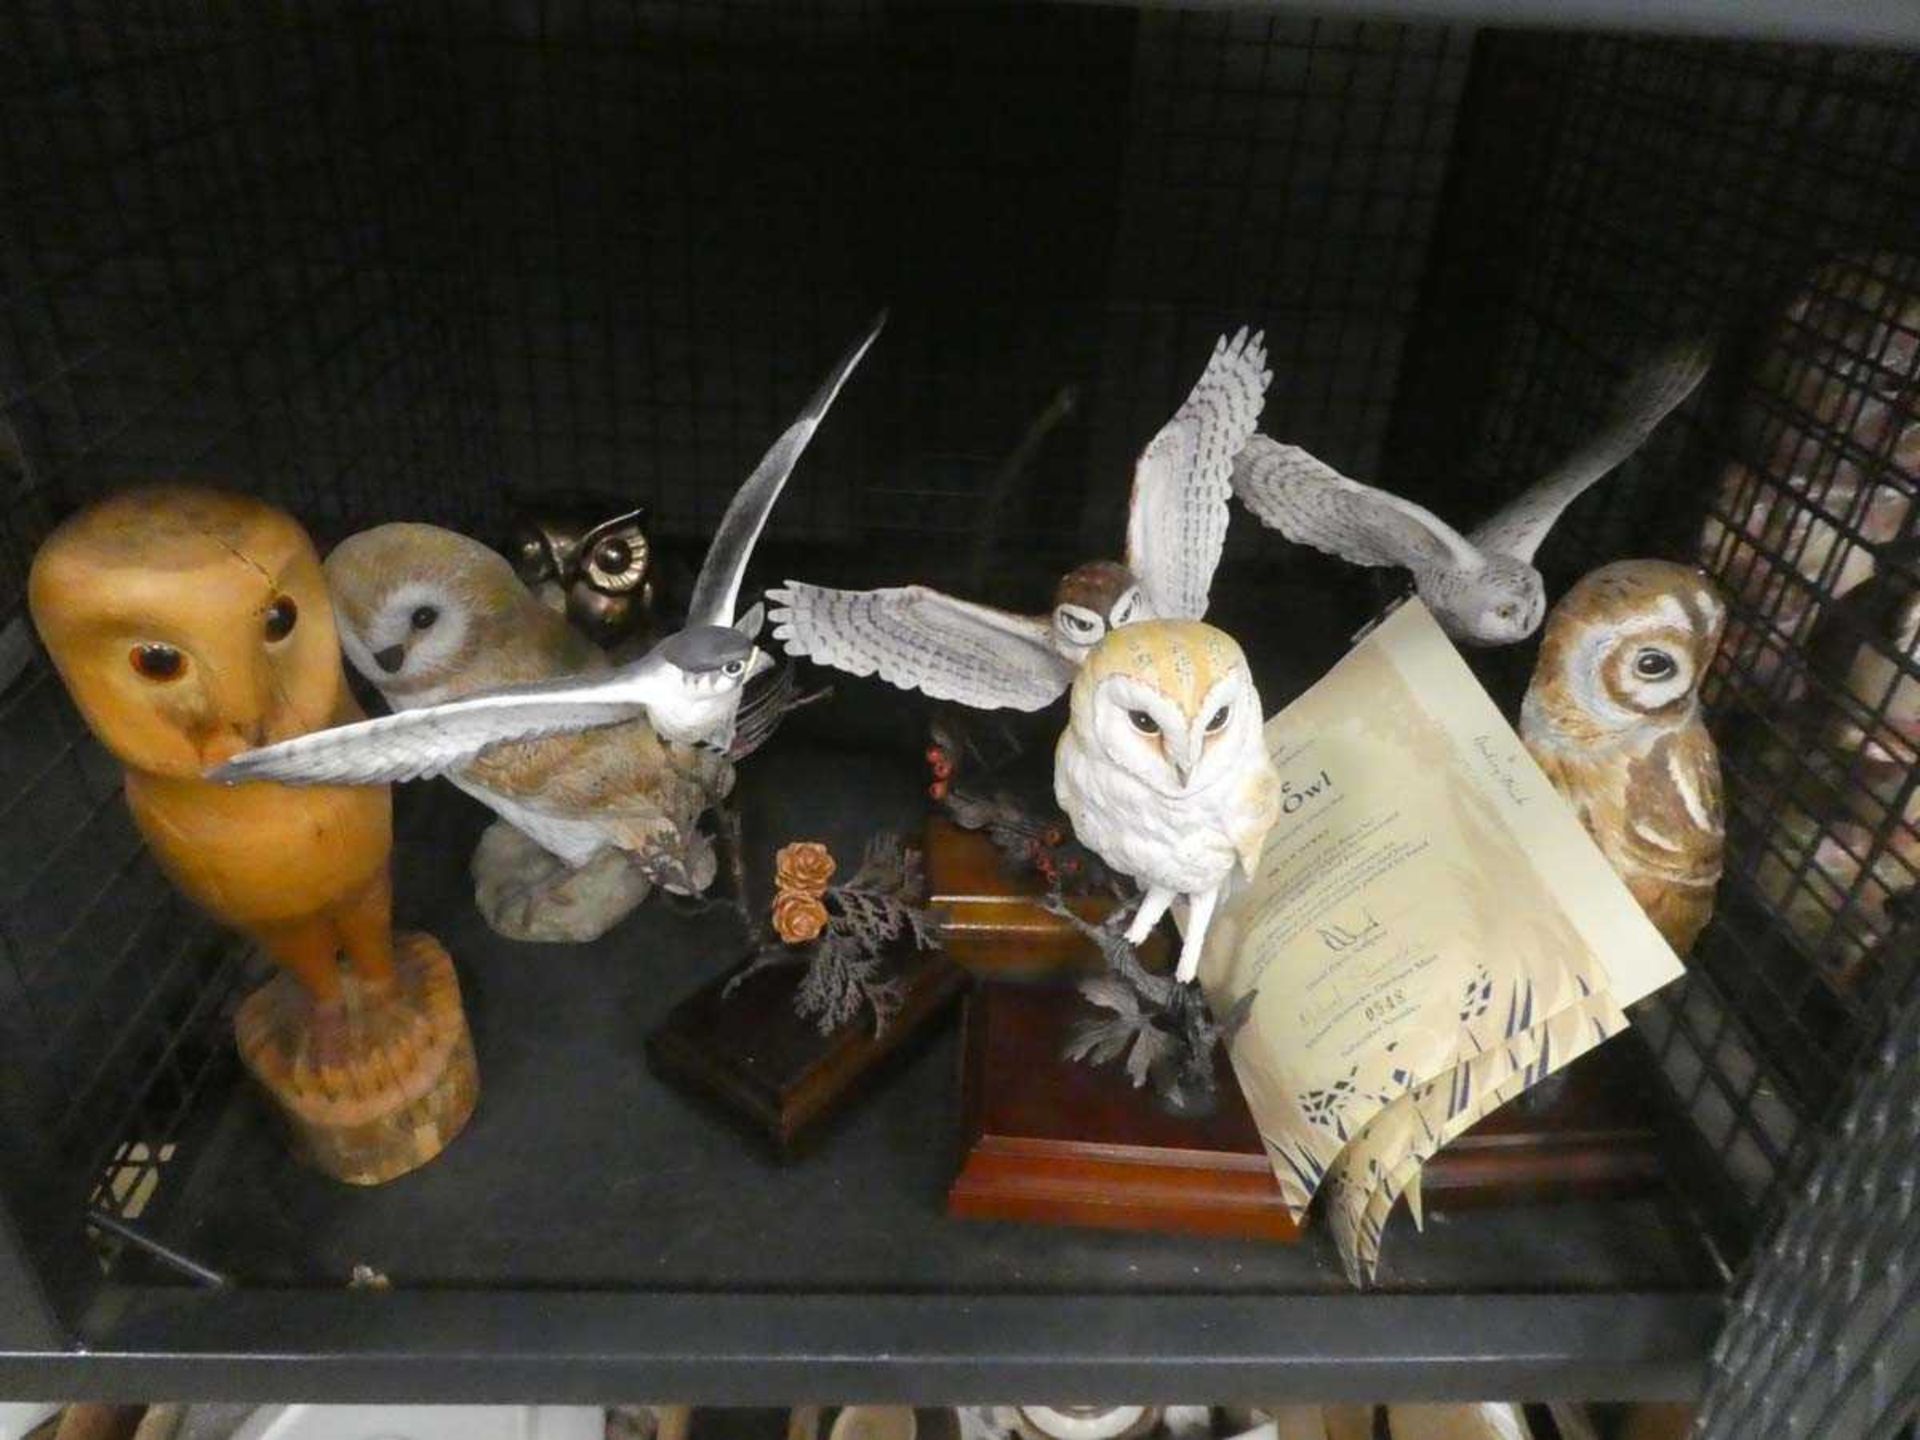 Cage containing owl and other raptor ornaments